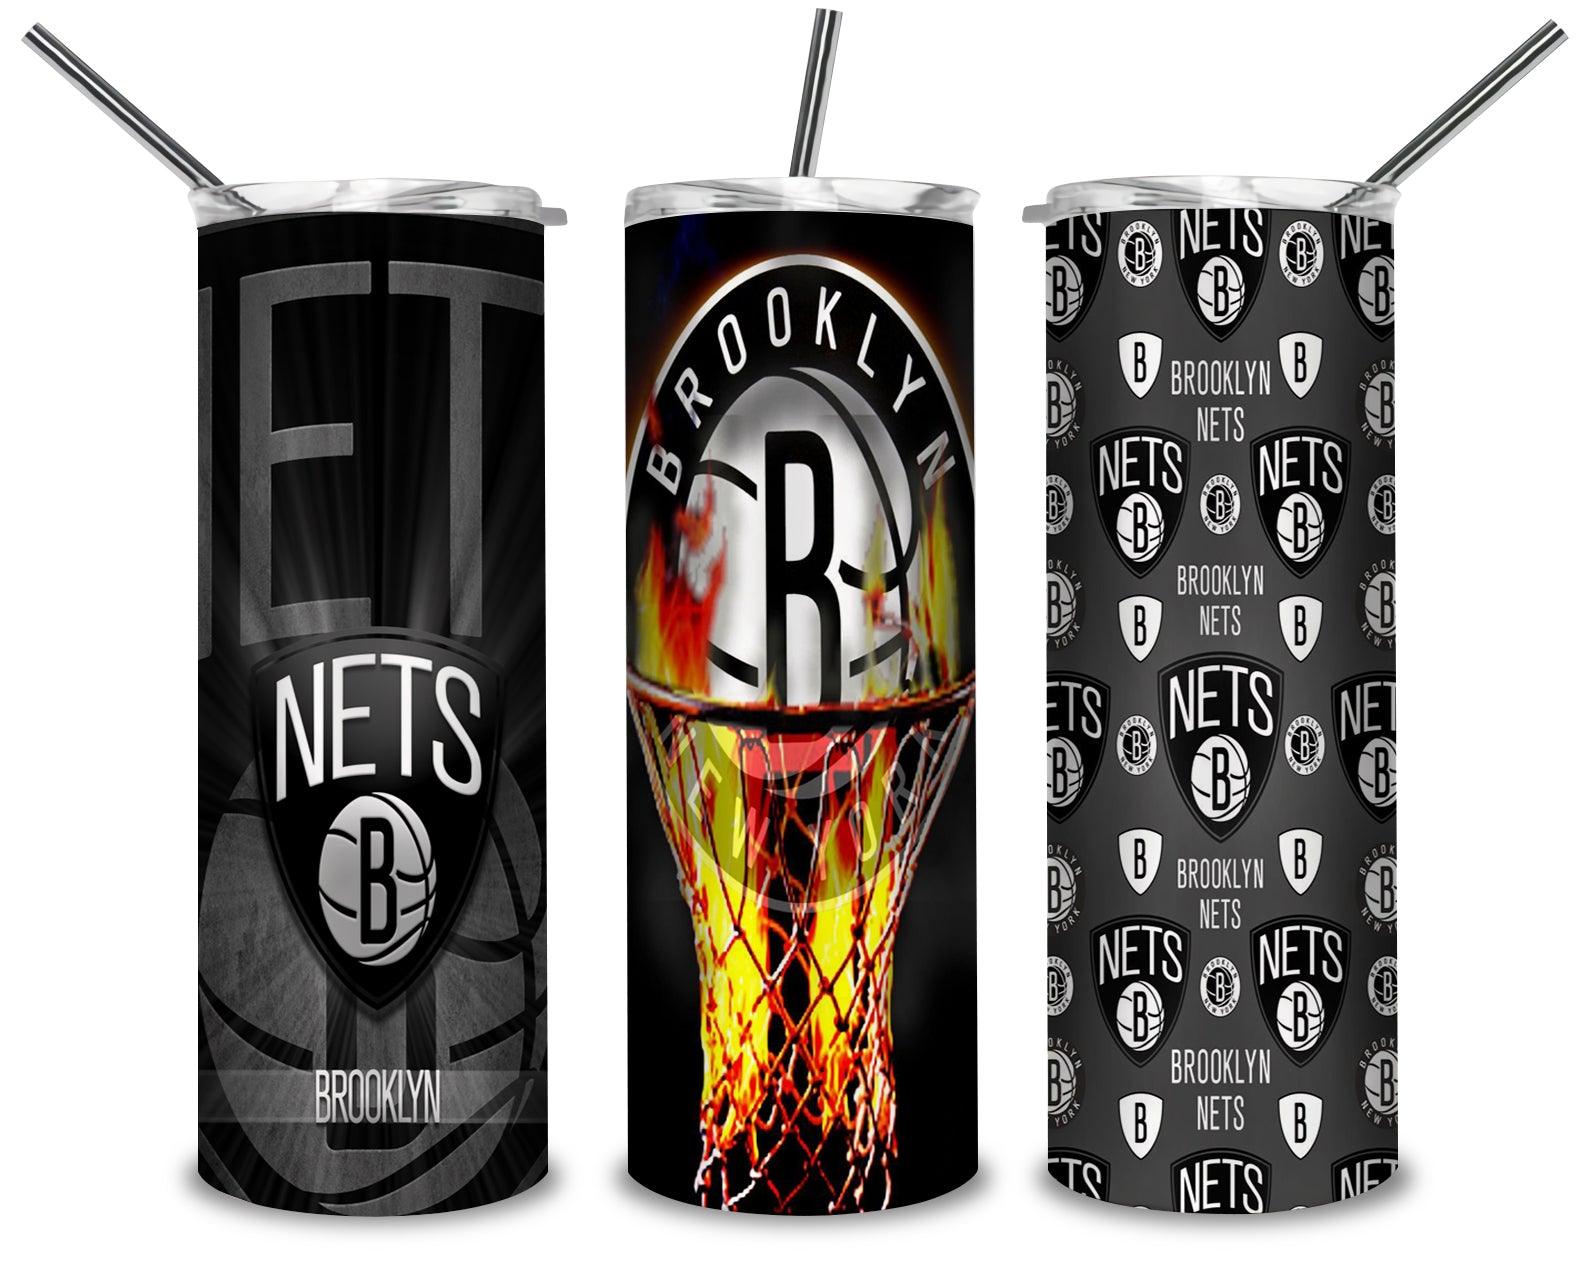 Brooklyn Nets 2 PNG, Brooklyn Nets Roster 20oz Skinny Tumbler Designs PNG, Sublimation Designs PNG - TheDigitalSVG